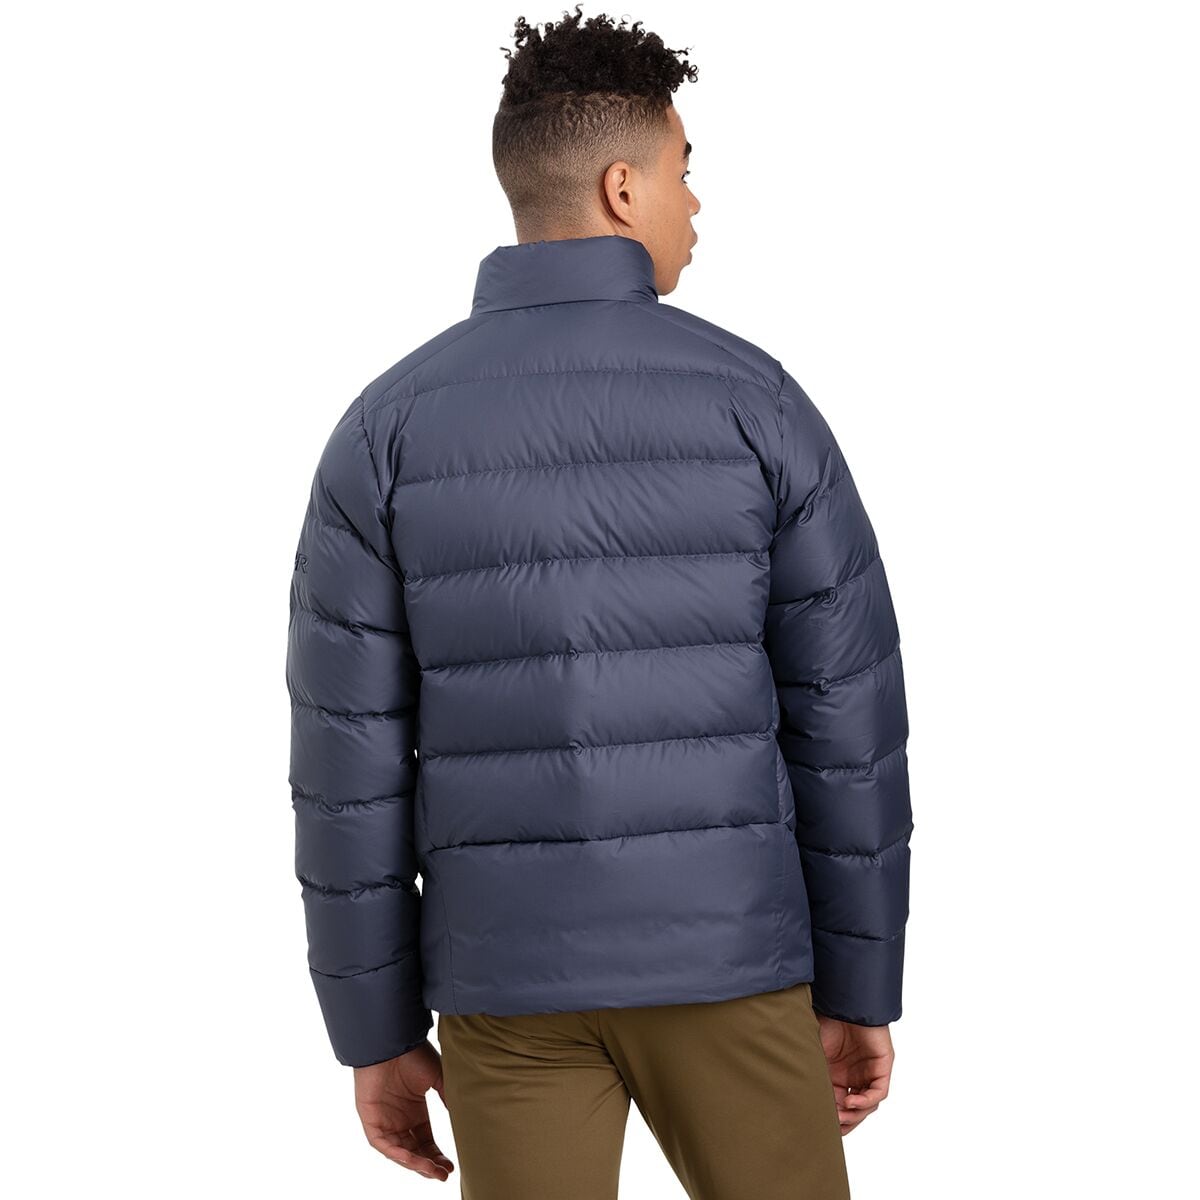 Outdoor Research Coldfront Down Jacket - Men's - Clothing